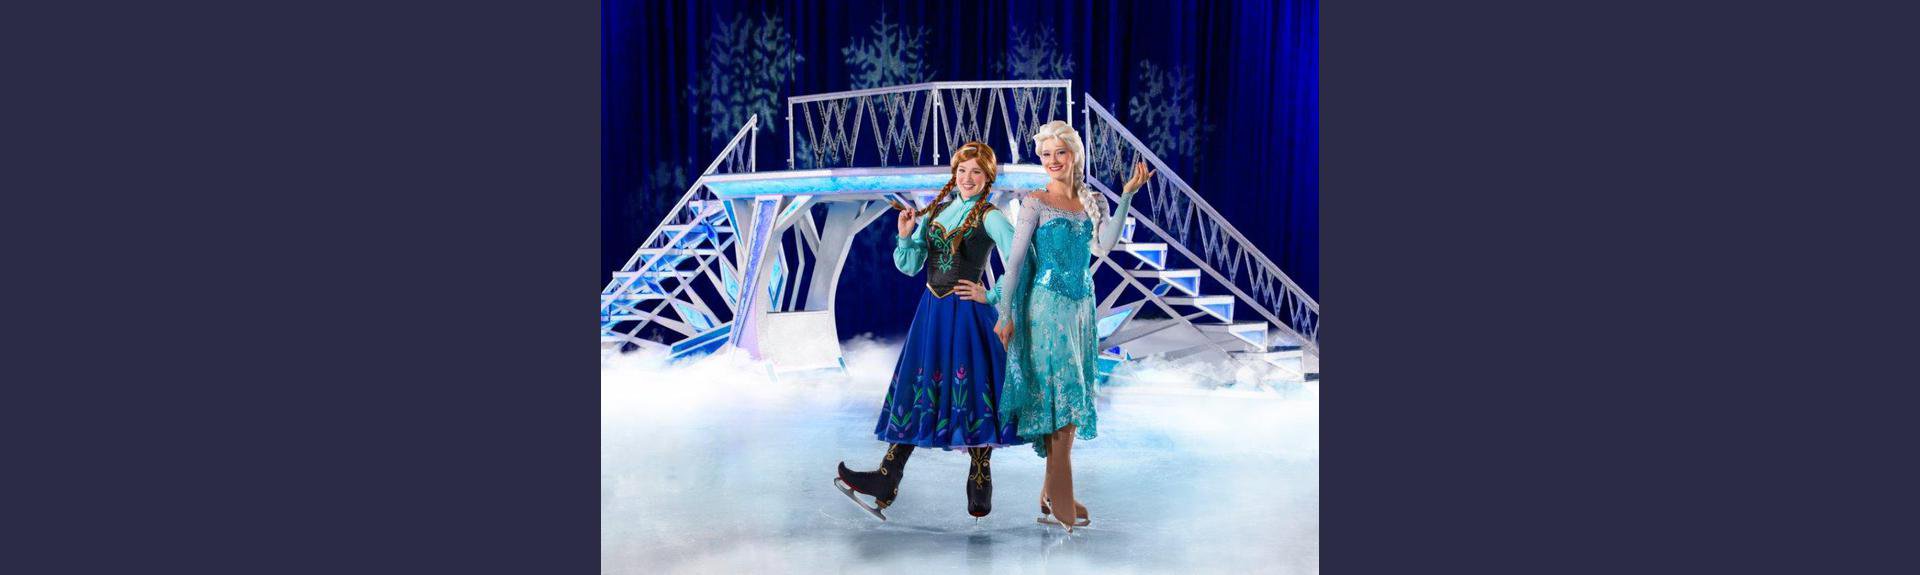 The Wonderful World of Disney on Ice | Show | Cape Town